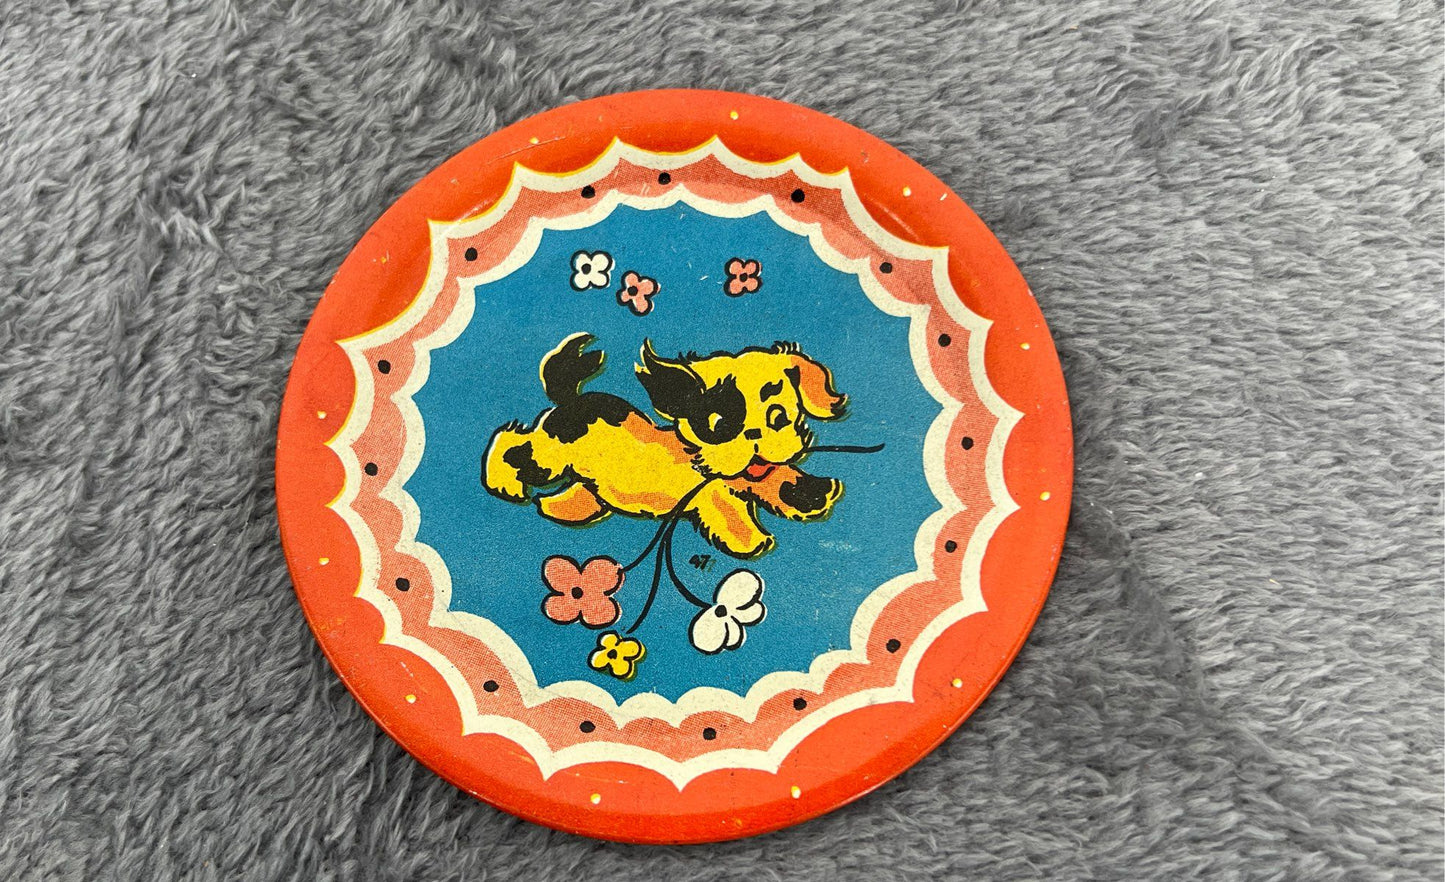 Antique/Vintage Tin Litho Tea Set Of 3 Plates With Puppy And Flower 1930's